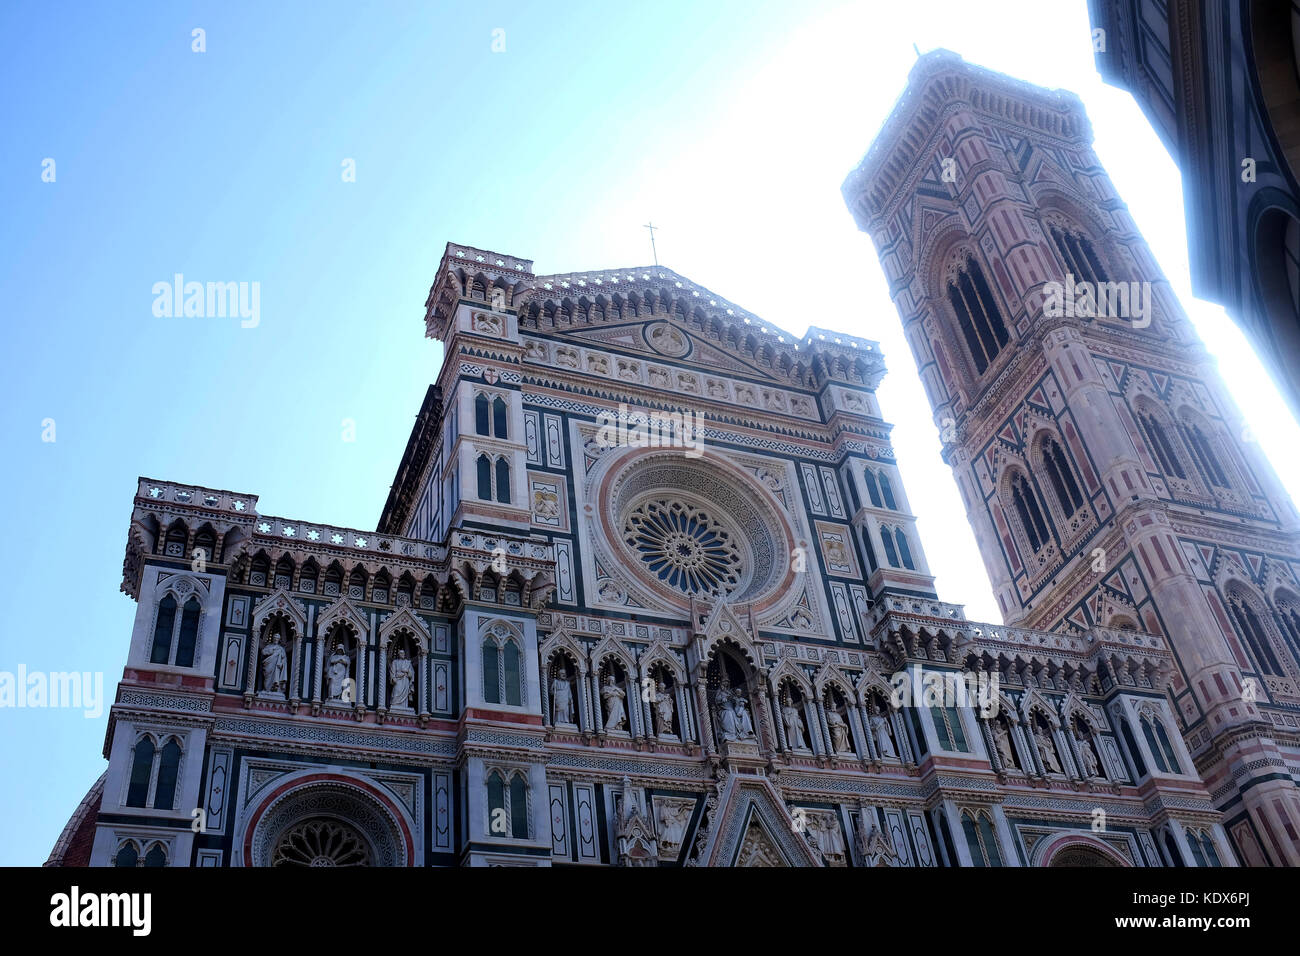 The Cathedral of Saint Mary of the Flower, Di santa maria del Fiore in Florence, Italy with its amazing Brunelleschi Dome. Stock Photo